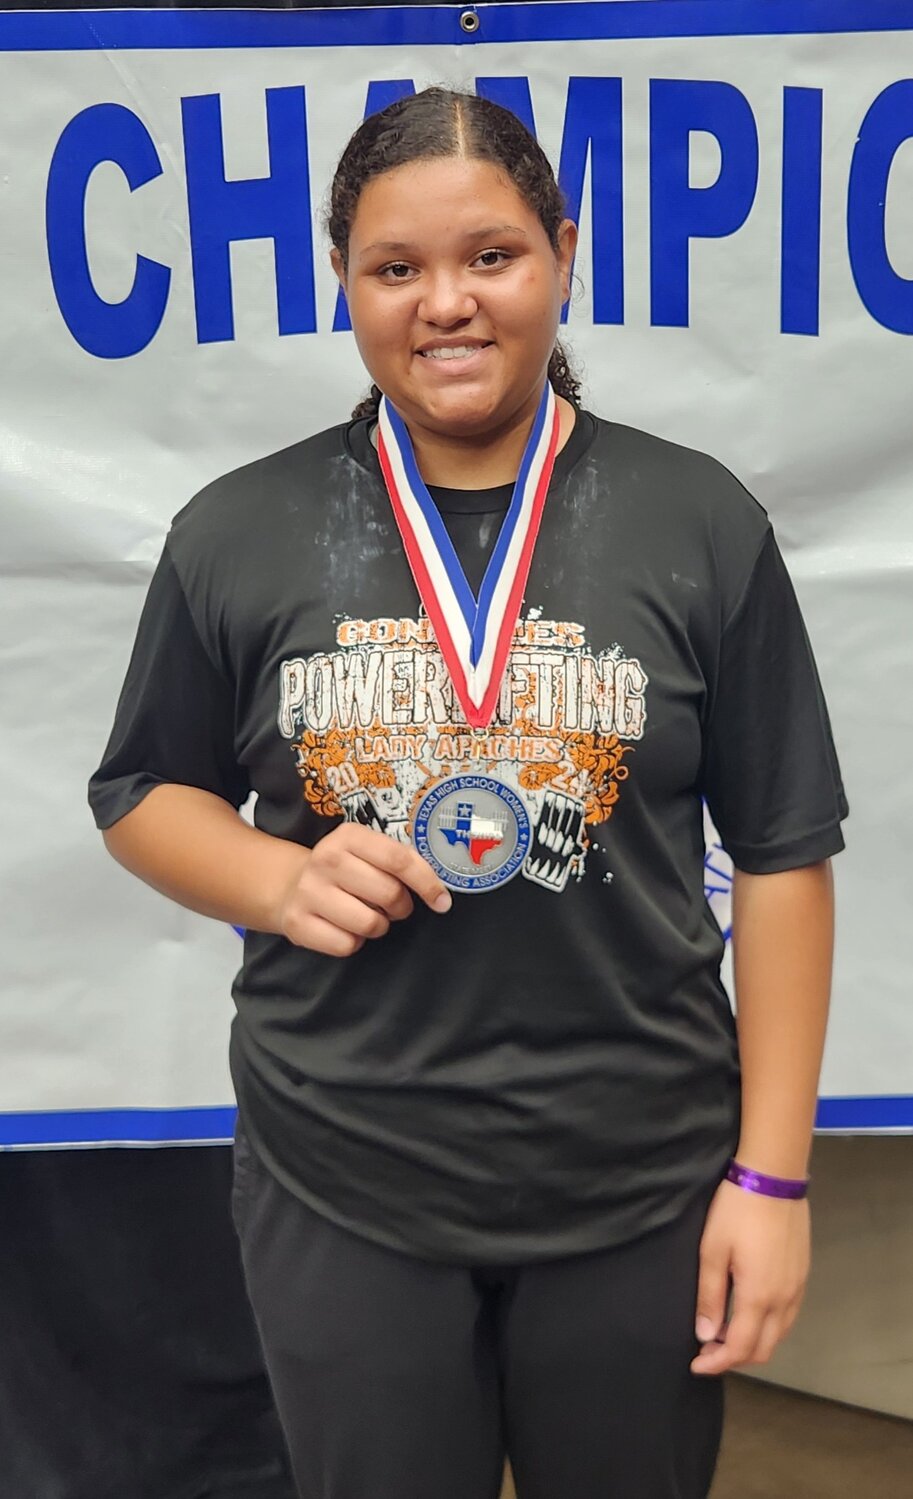 Madison Sampleton holds her state runner up medal for the 220-pound division at the THSWPA state powerlifting meet in Frisco Friday, March 15. Sampleton completed her powerlifting season at 1070 total pounds in her weight division.